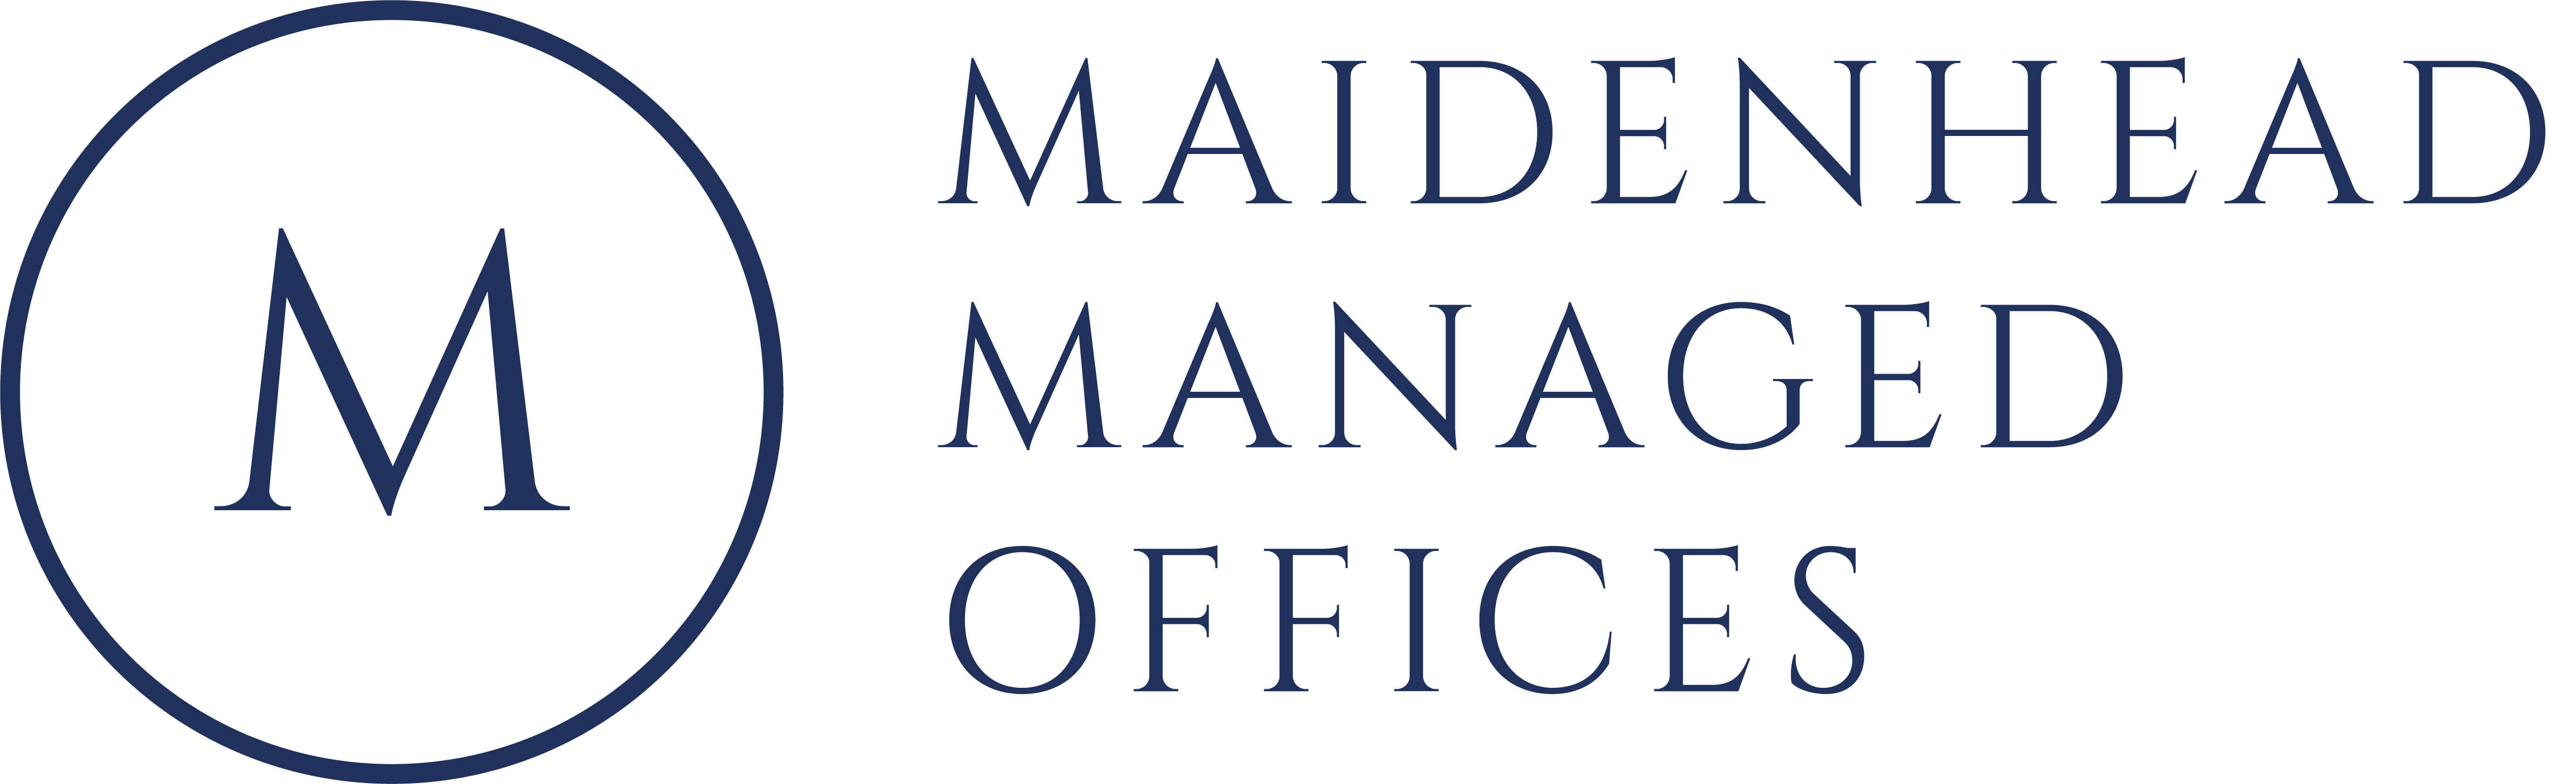 Maidenhead Managed Offices